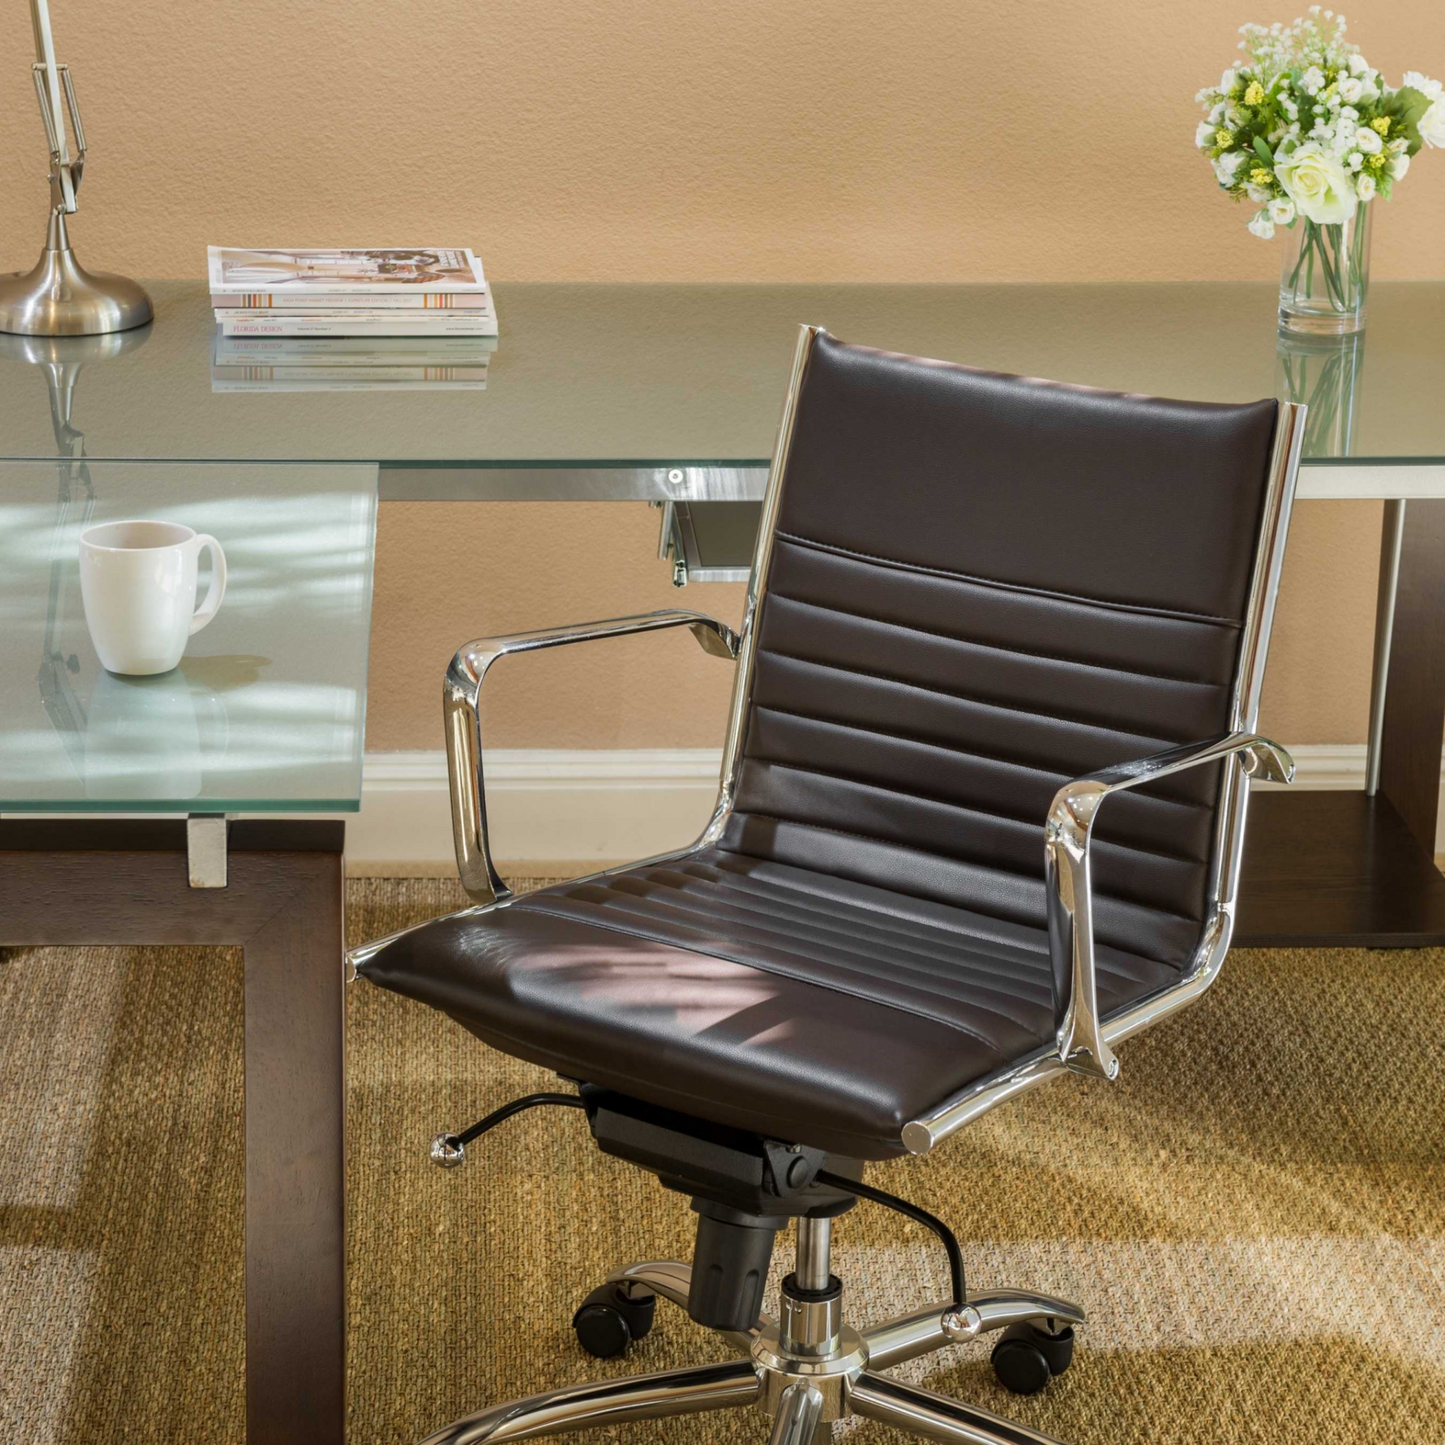 Low Back Ribbed Office Chair - Brown With Chromed Steel Base